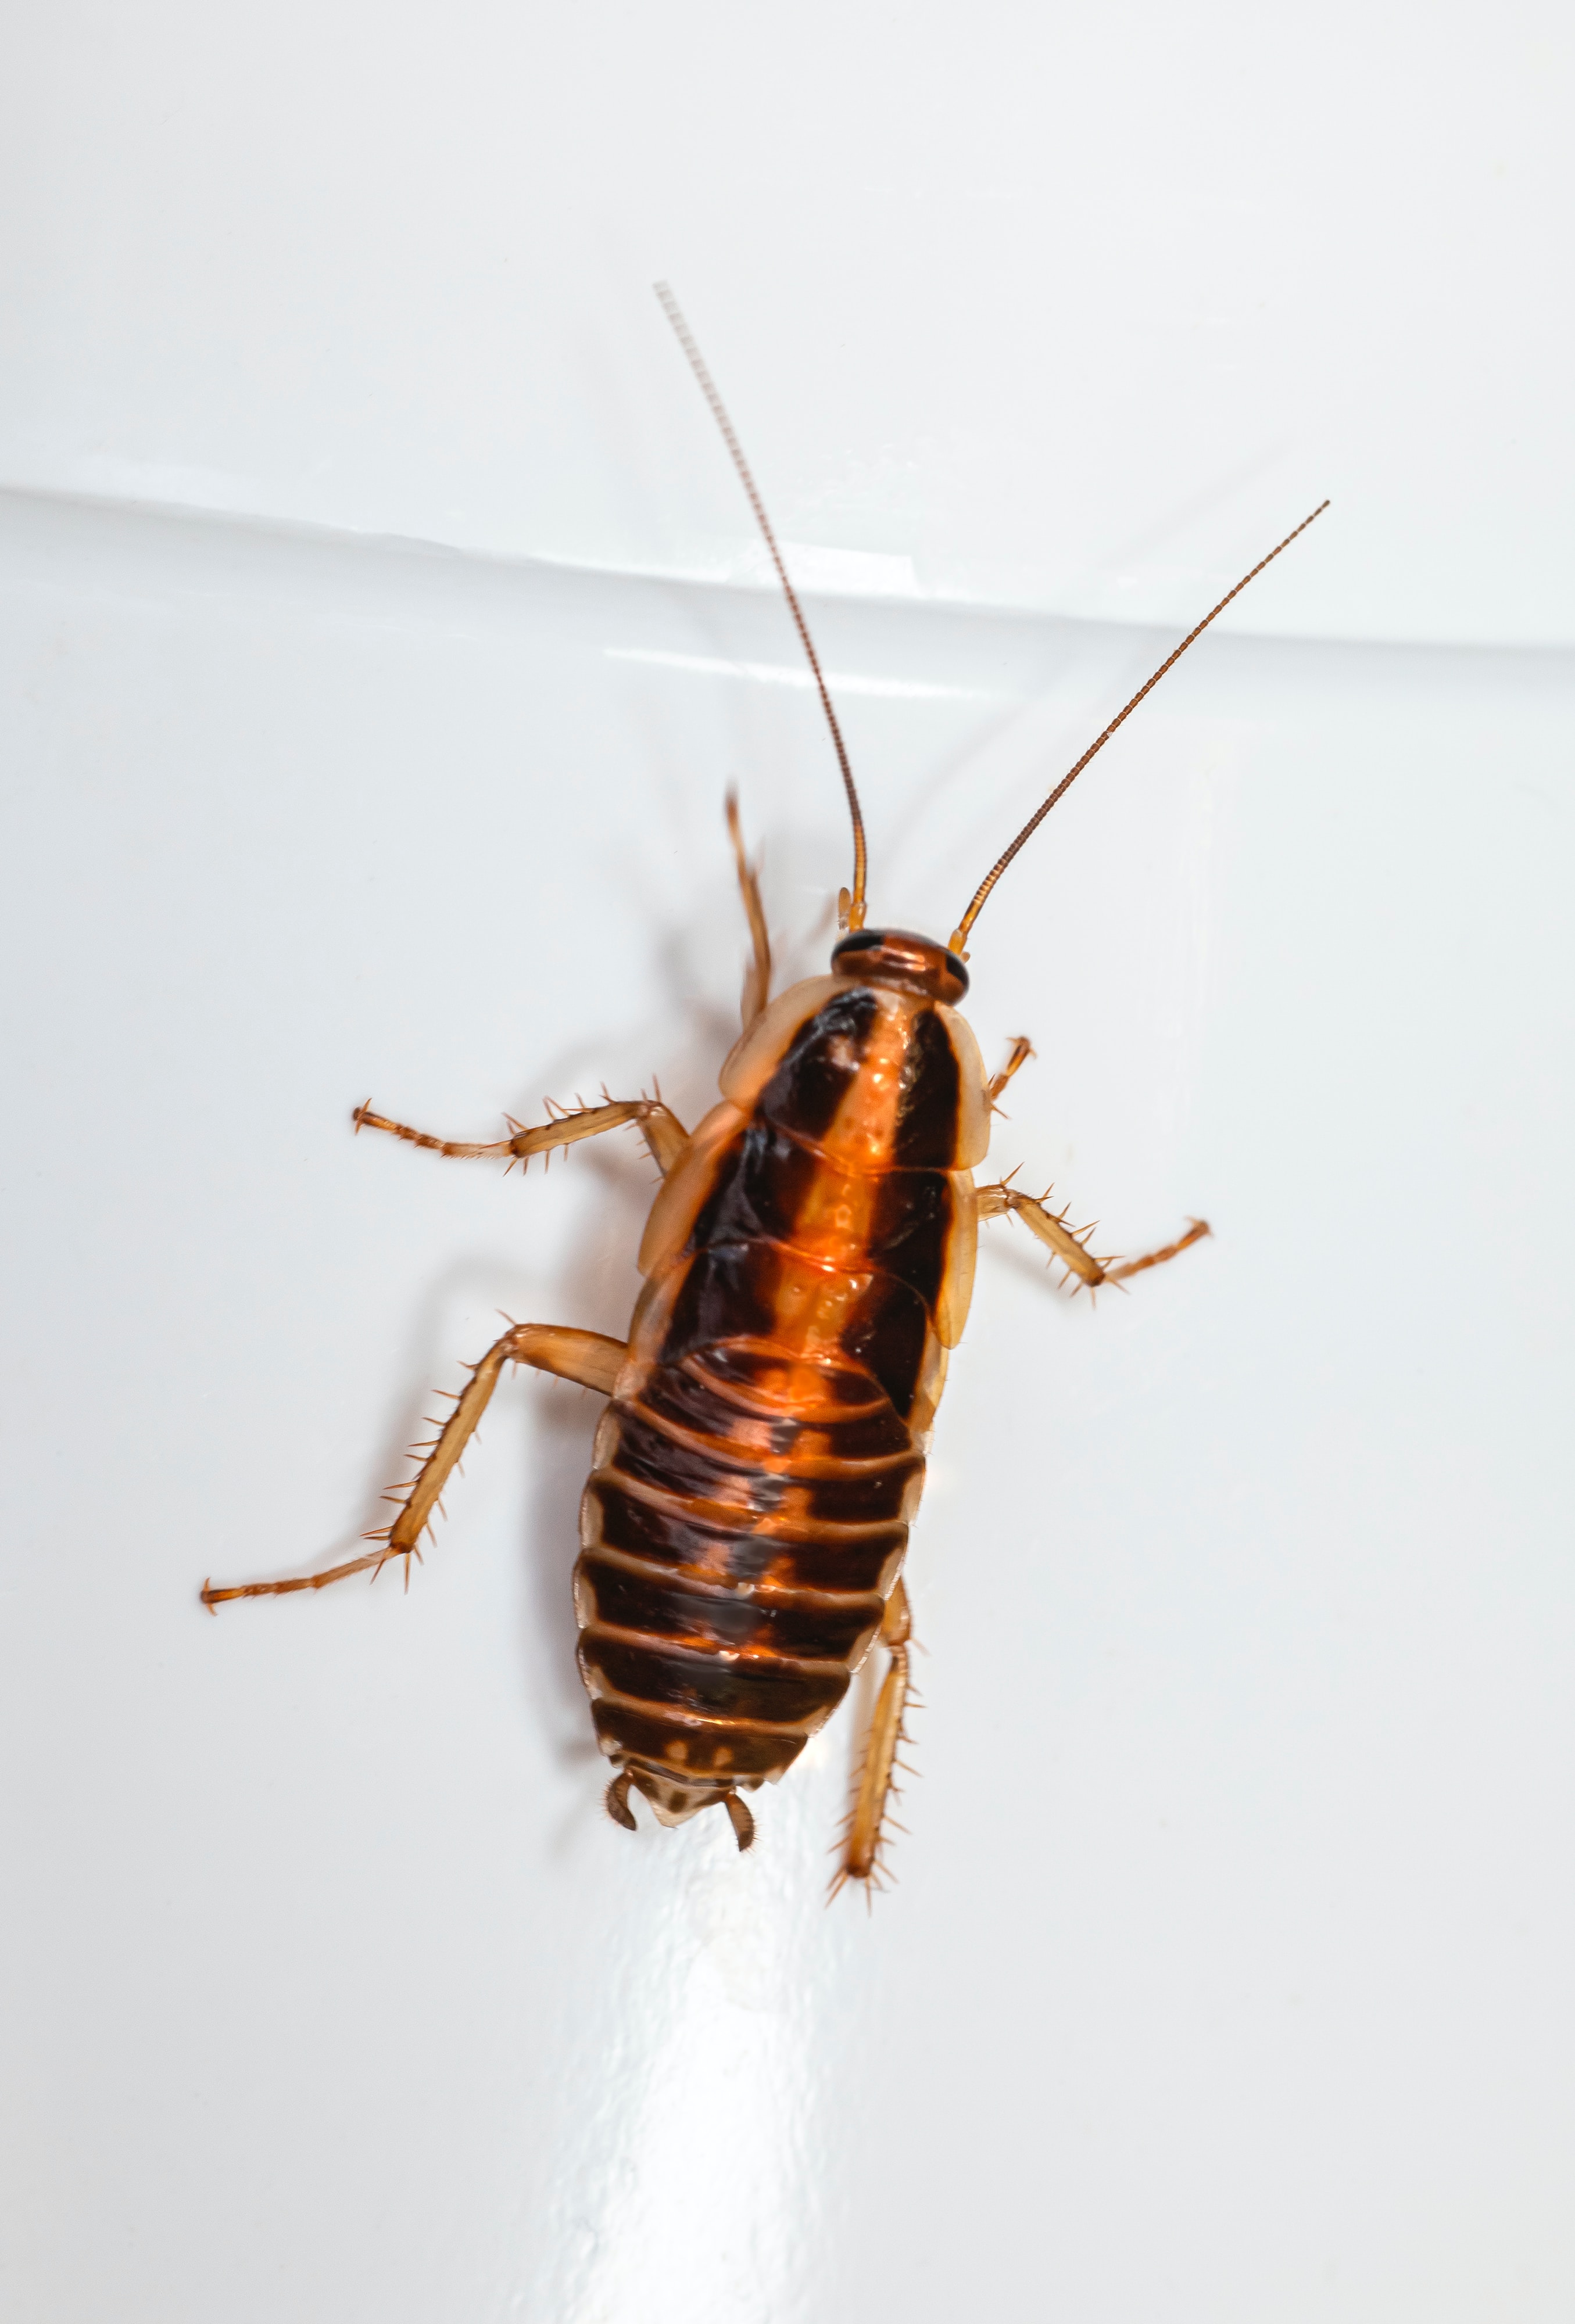 photograph of a cockroach